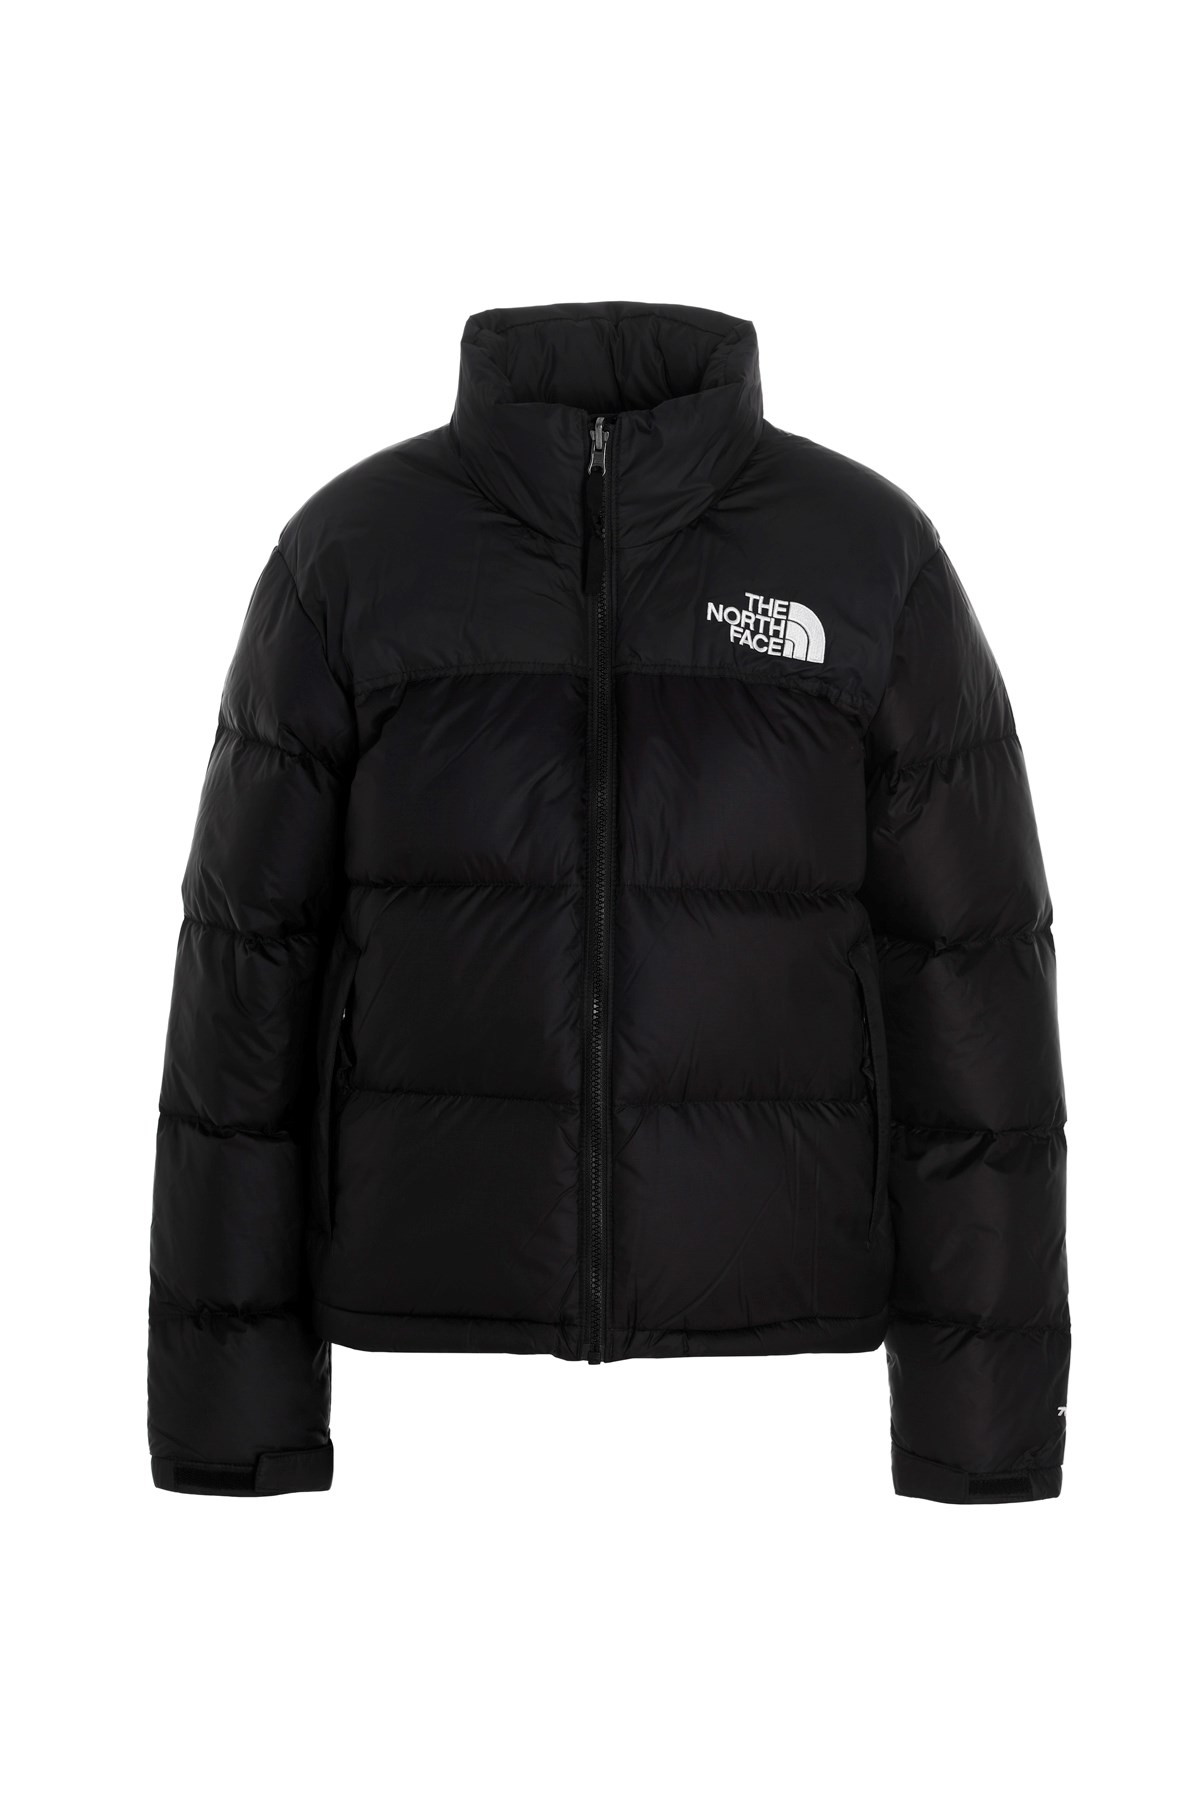 THE NORTH FACE 'Nuptse’ Puffer Jacket